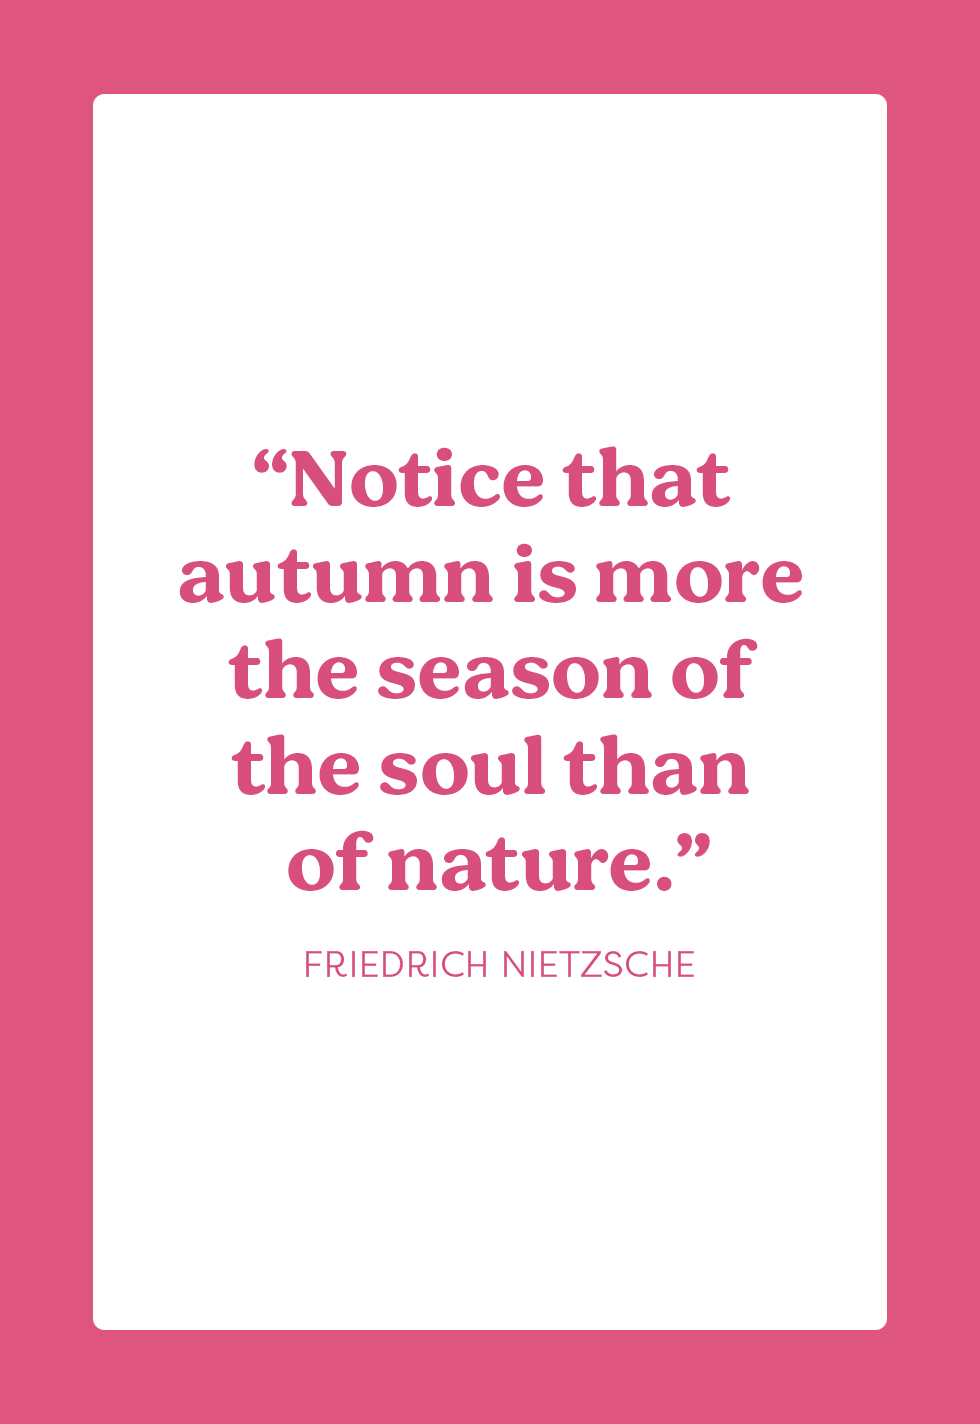 25 Best Fall Quotes and Beautiful Sayings About Autumn